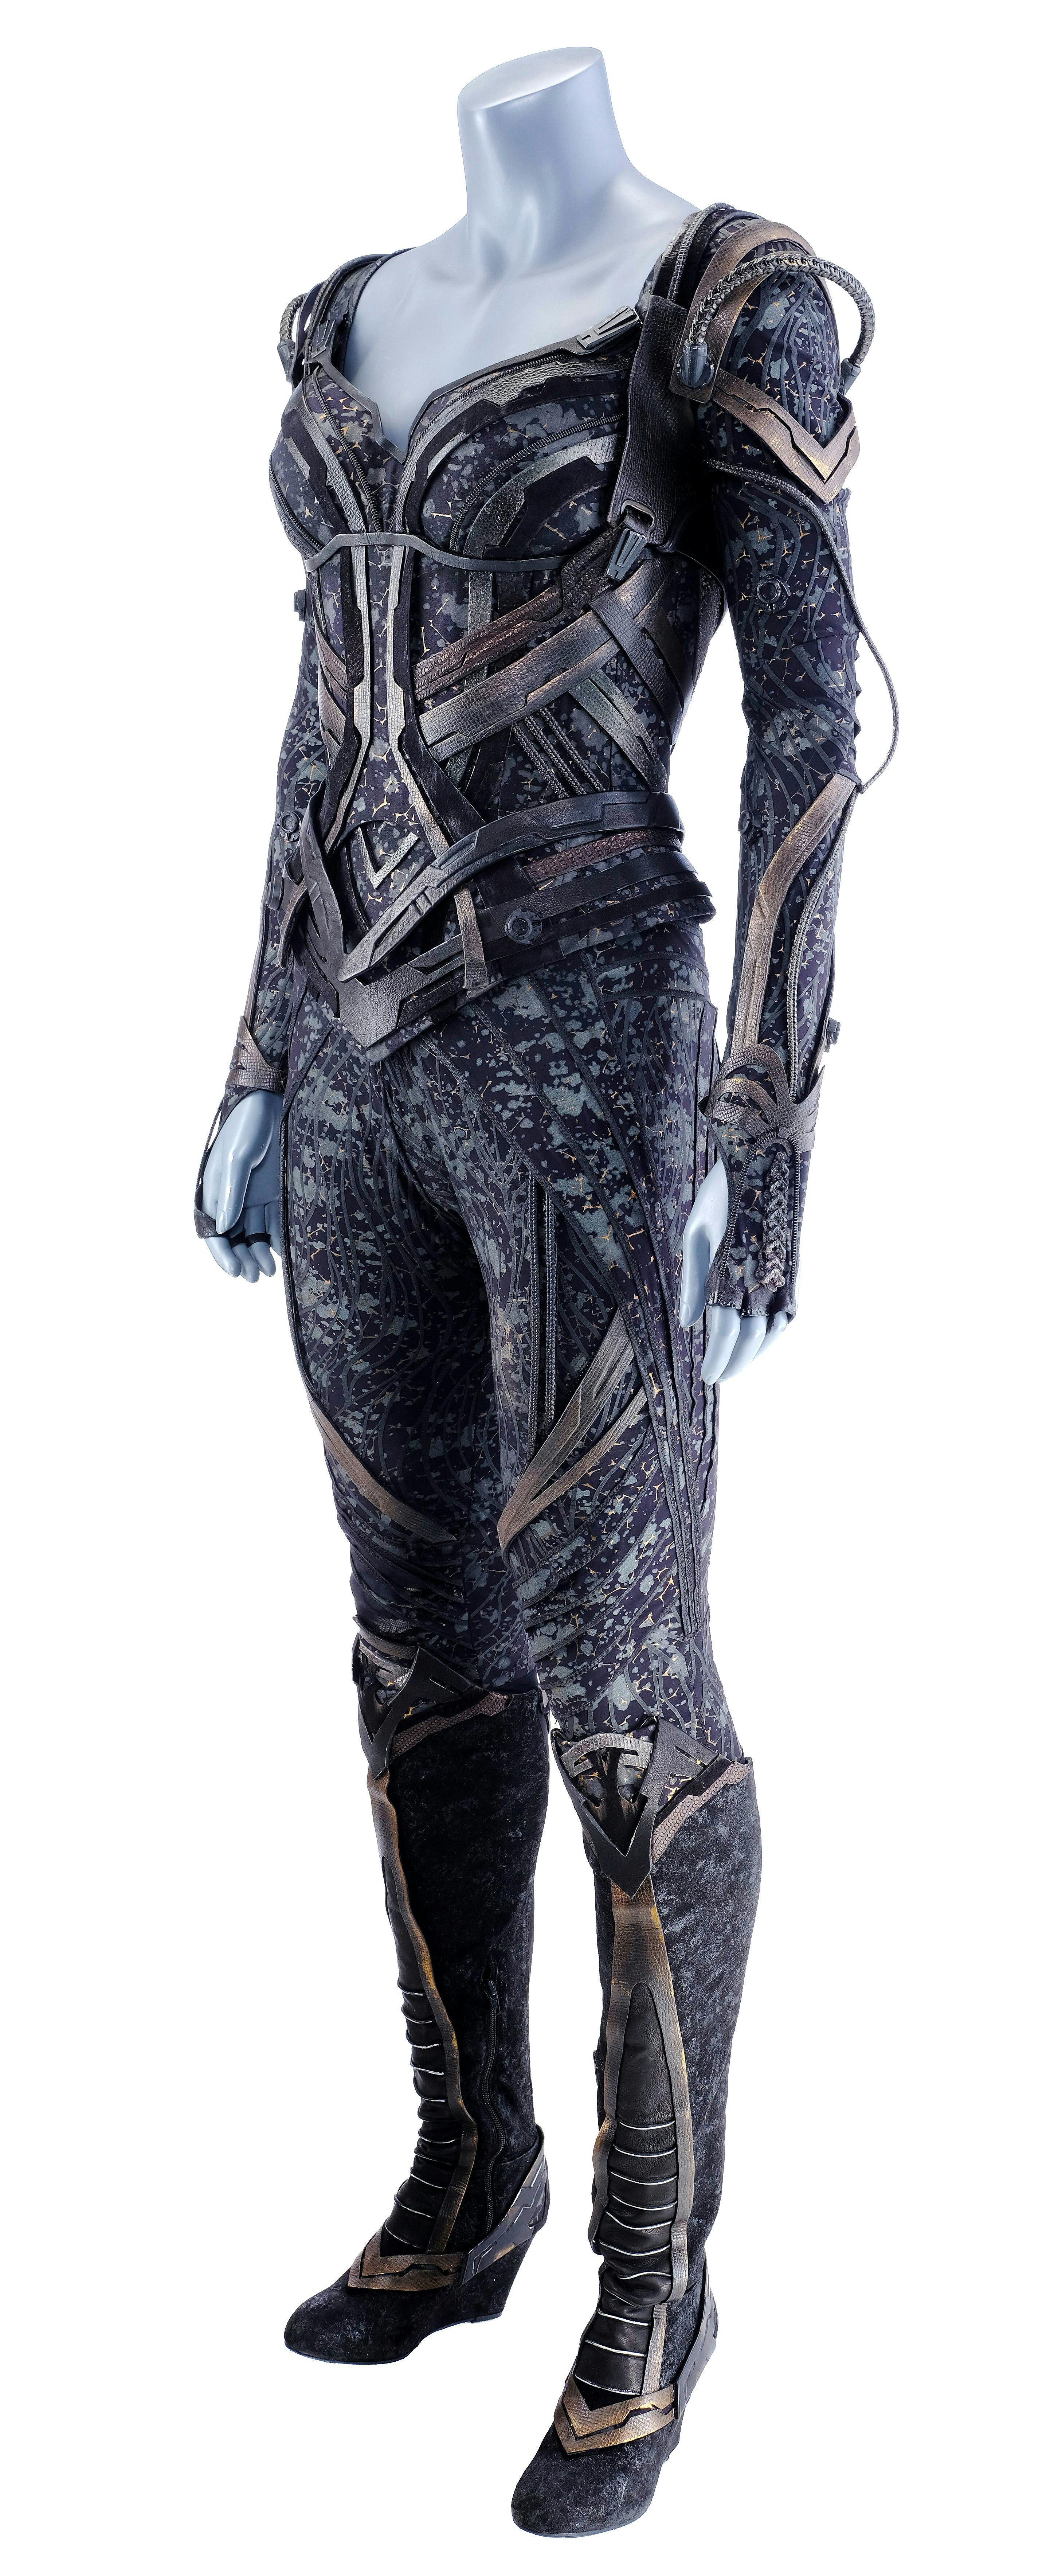 The stunt Borg Queen costume from Star Trek: Picard season two.